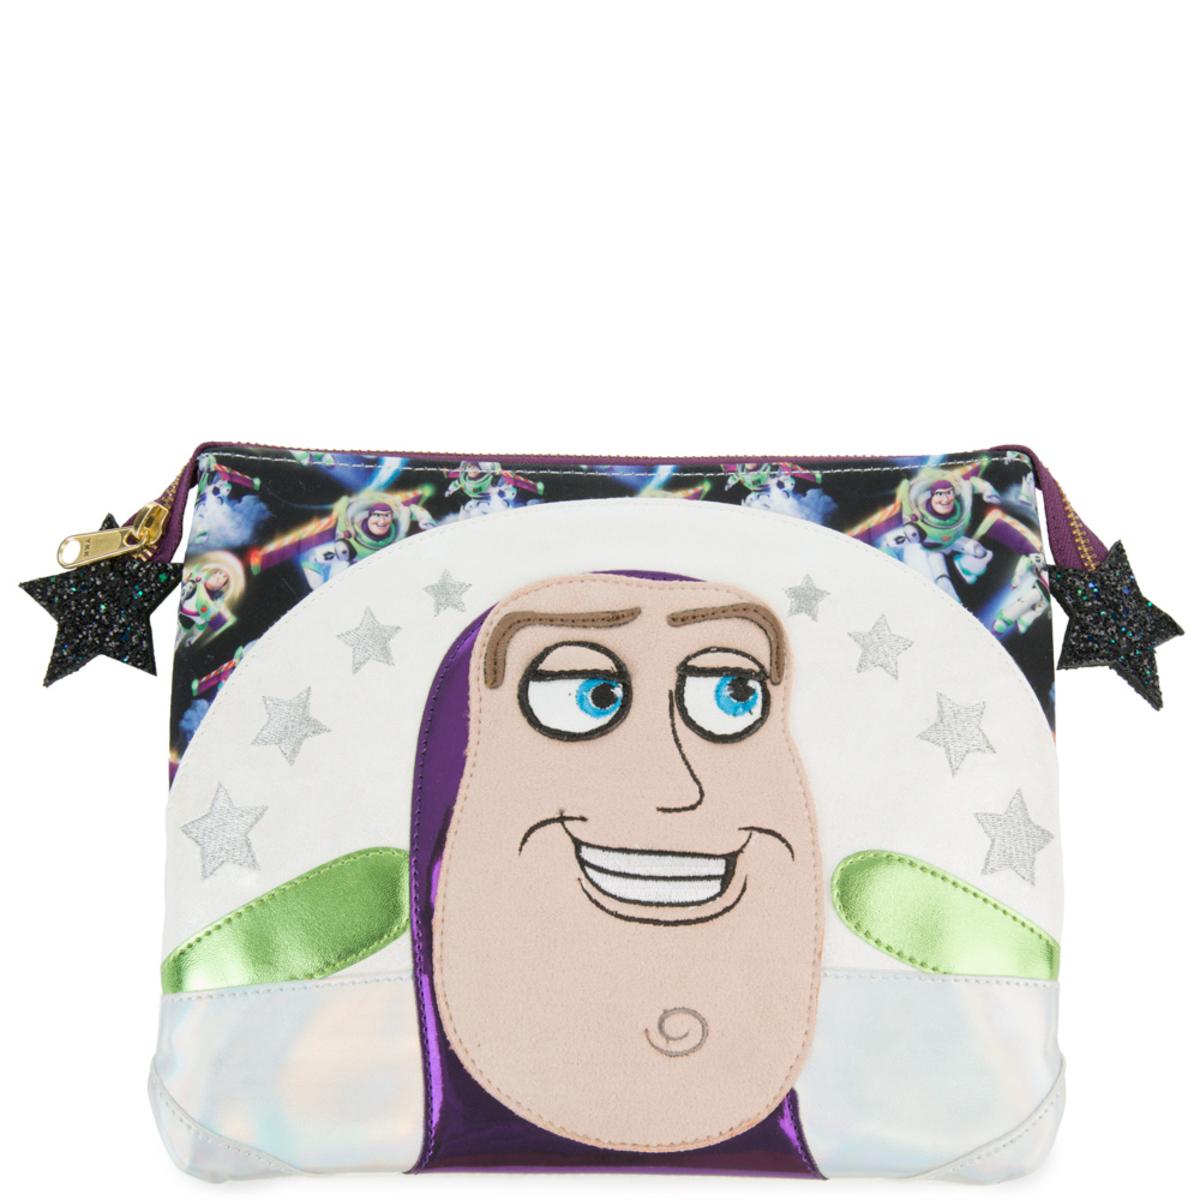 The Toy Story Irregular Choice Collection Is Beyond Out of This